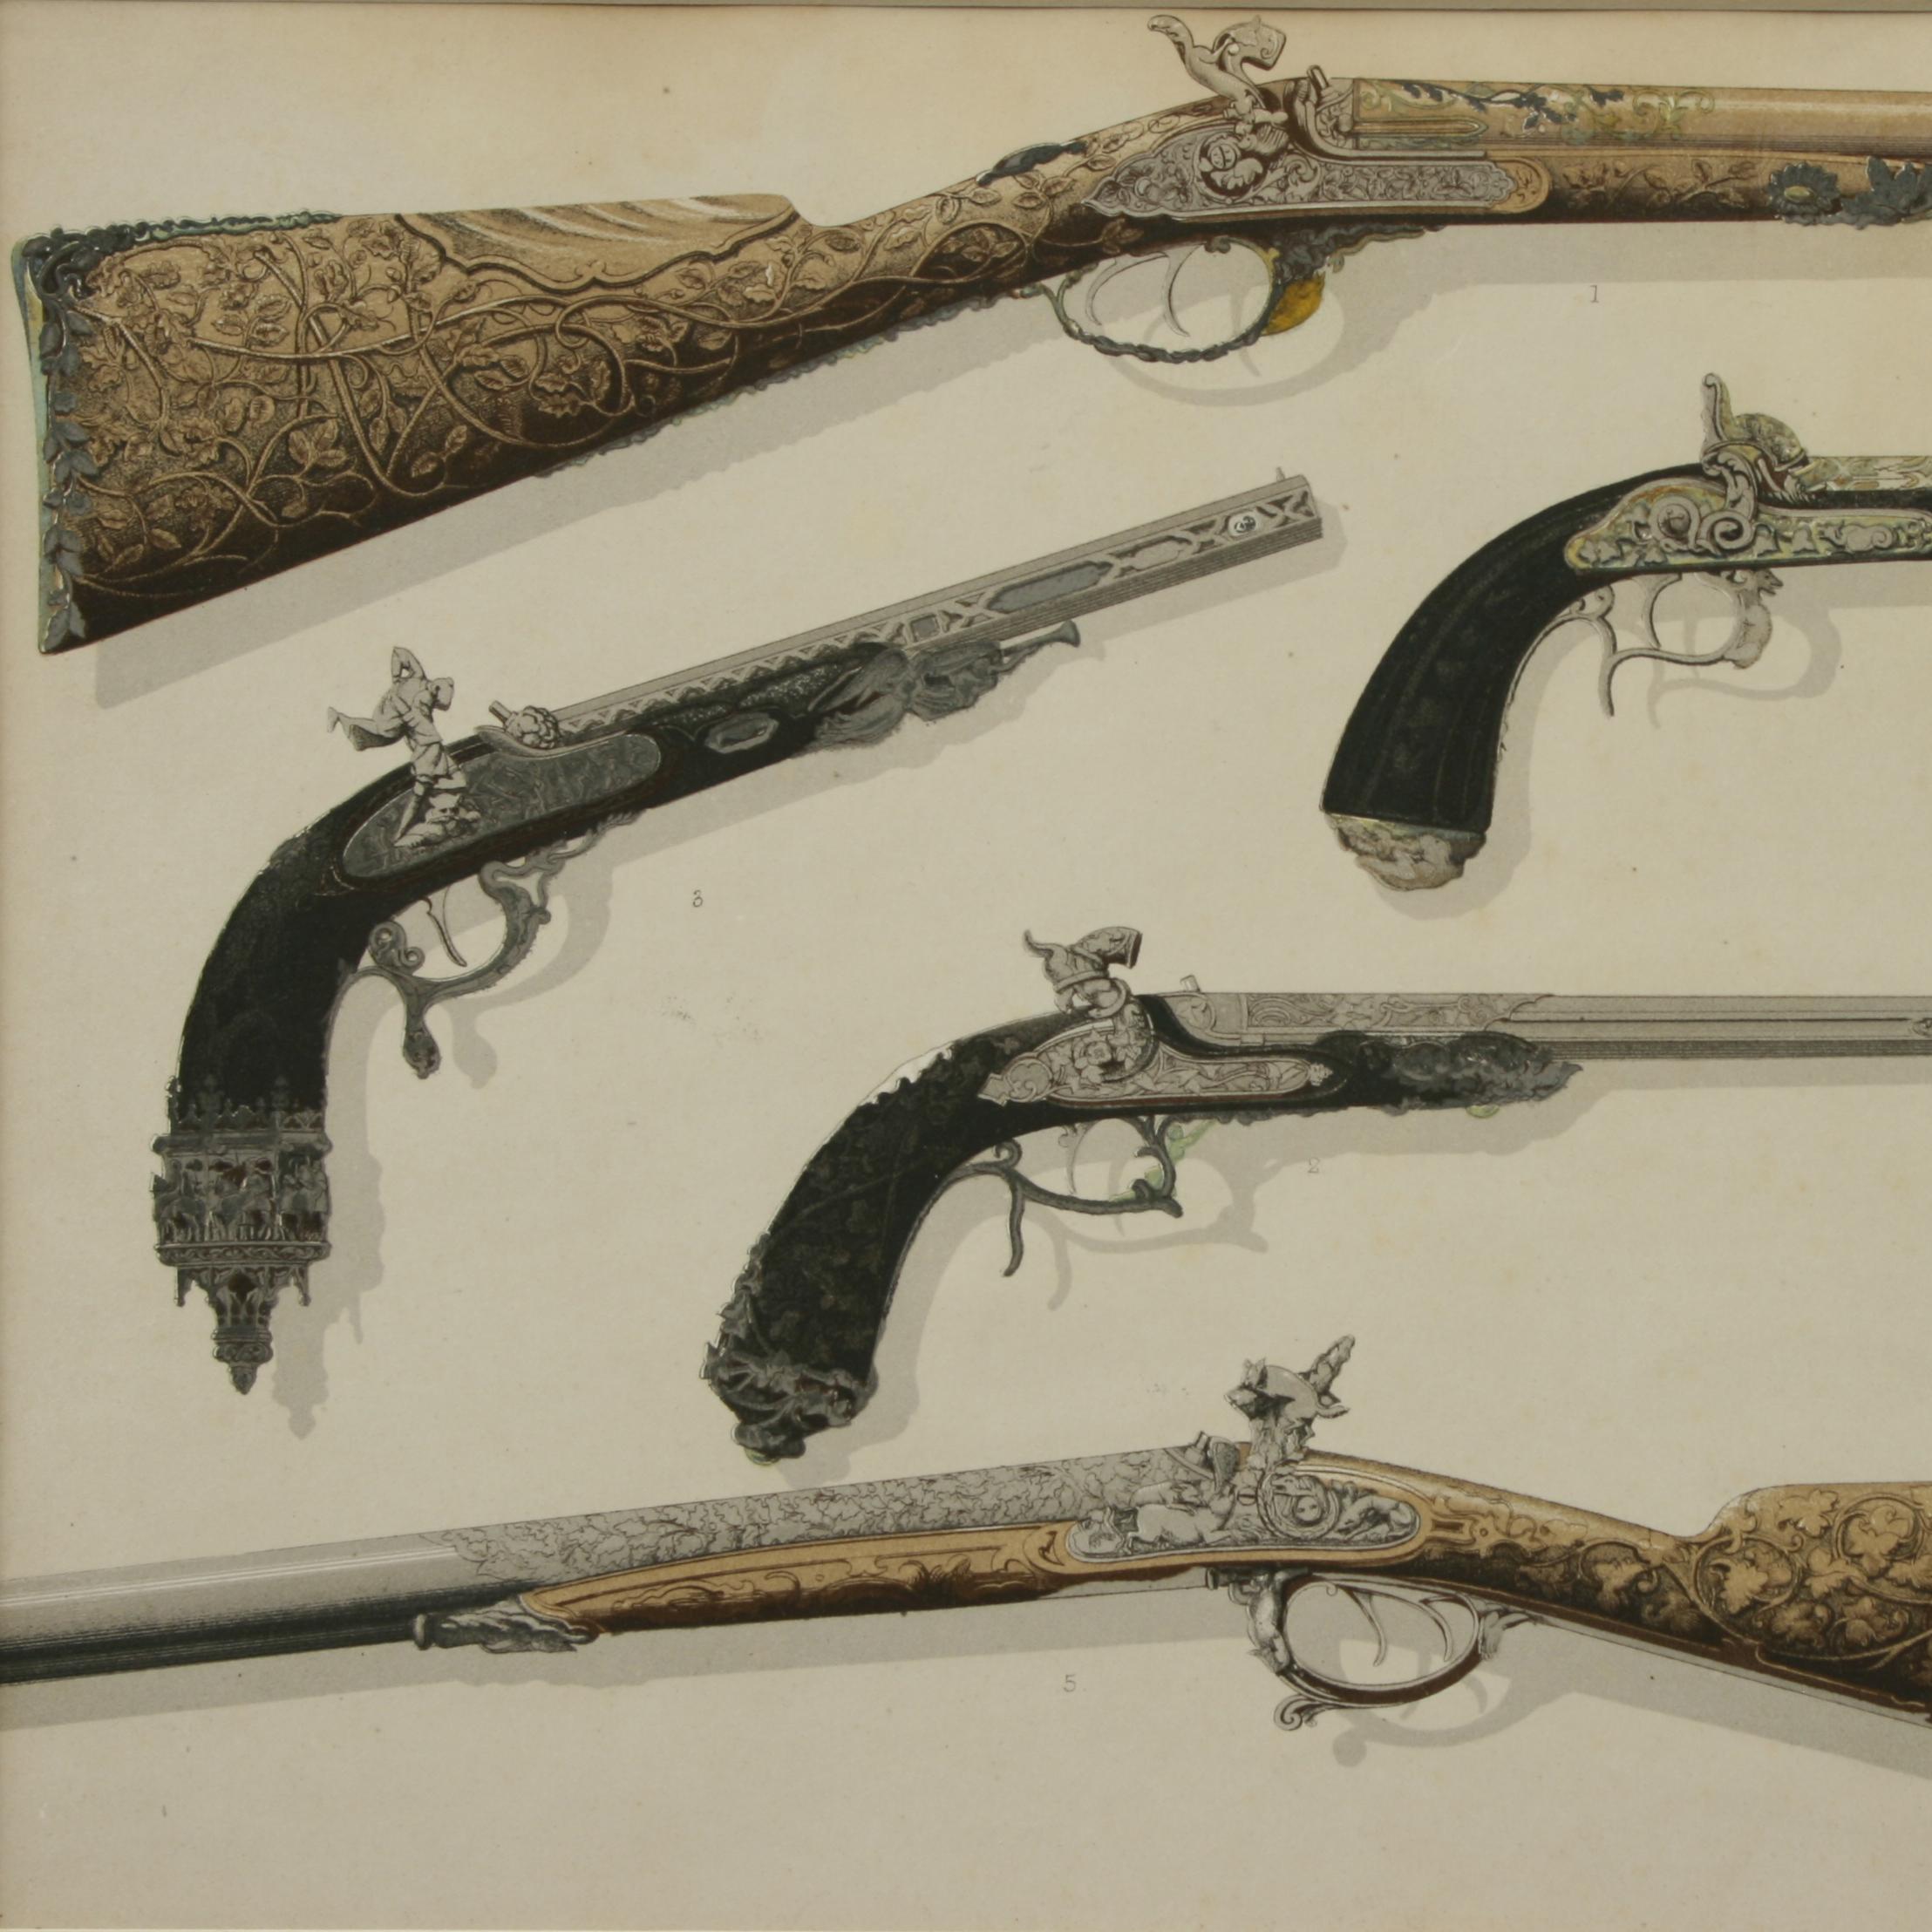 Pair of Antique Firearms, Guns, Pistols and Revolvers and Rifles Prints 2